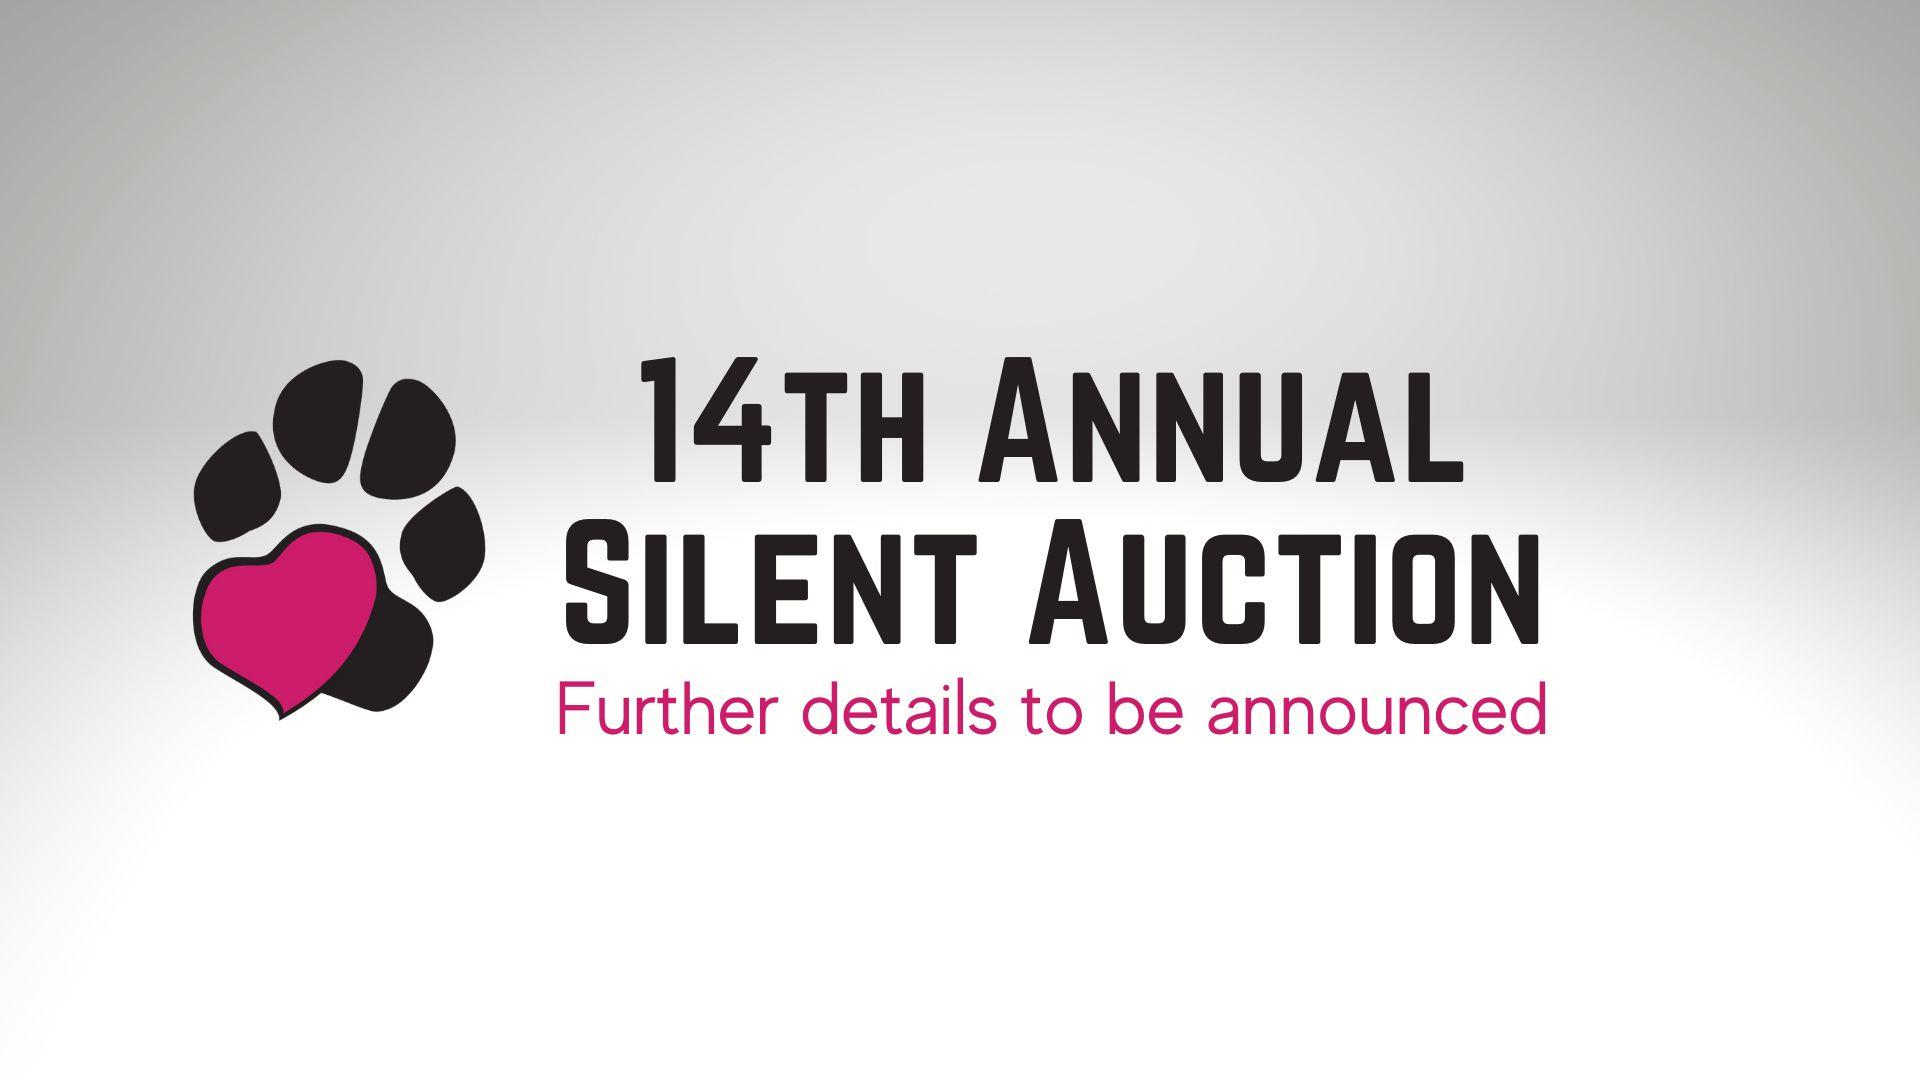 14th Annual Silent Auction - Further details to be announced